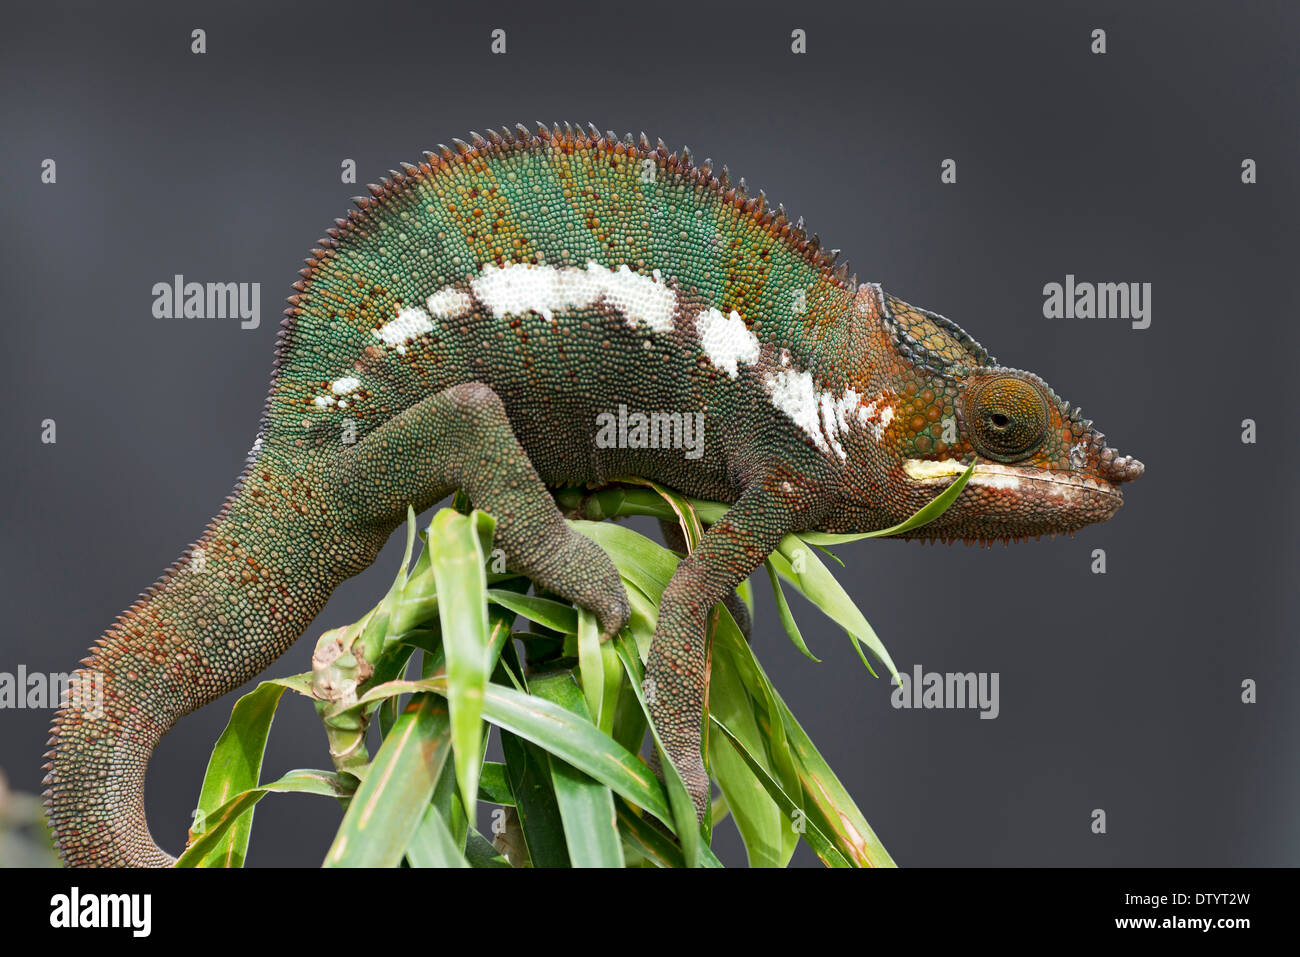 Panther Chameleon (Furcifer pardalis), butterfly house, Forgaria nel Friuli, Udine province, Italy Stock Photo